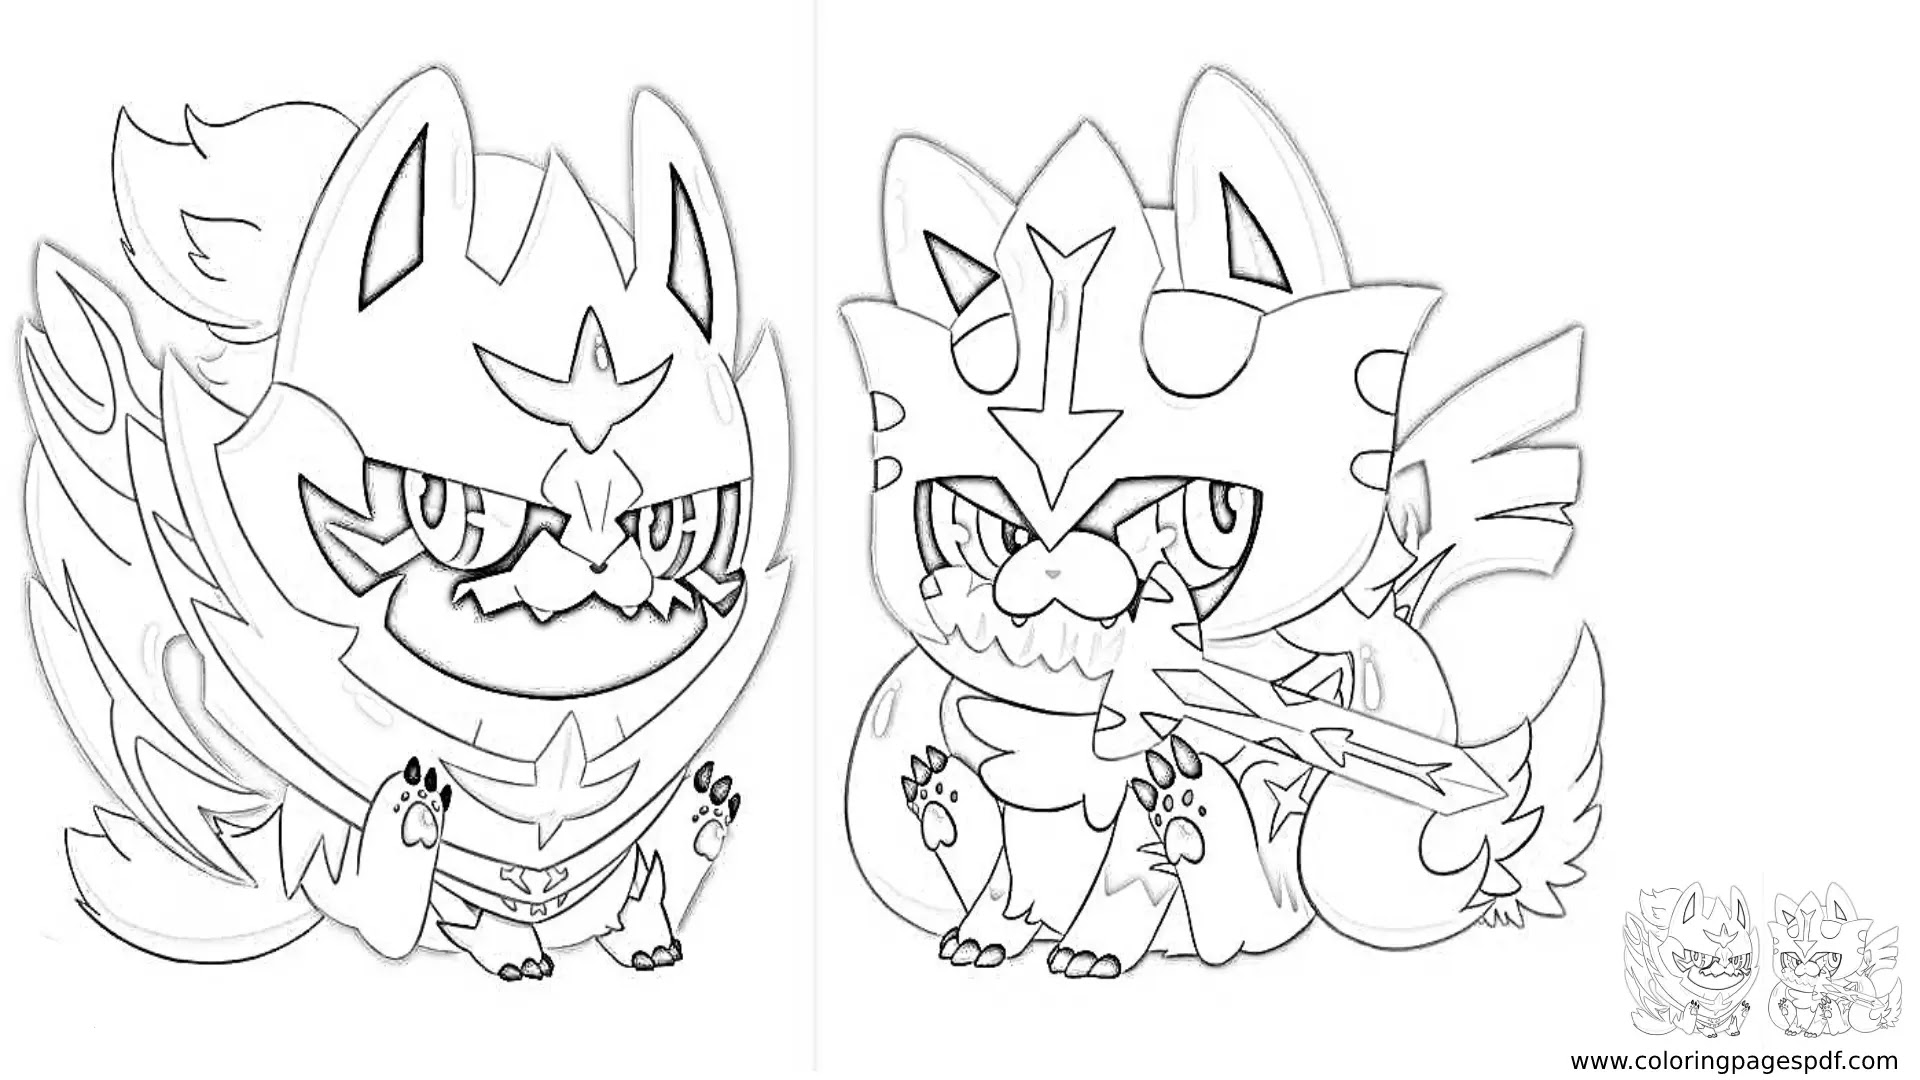 Coloring Page Of Zacian And Zamazenta As Cats